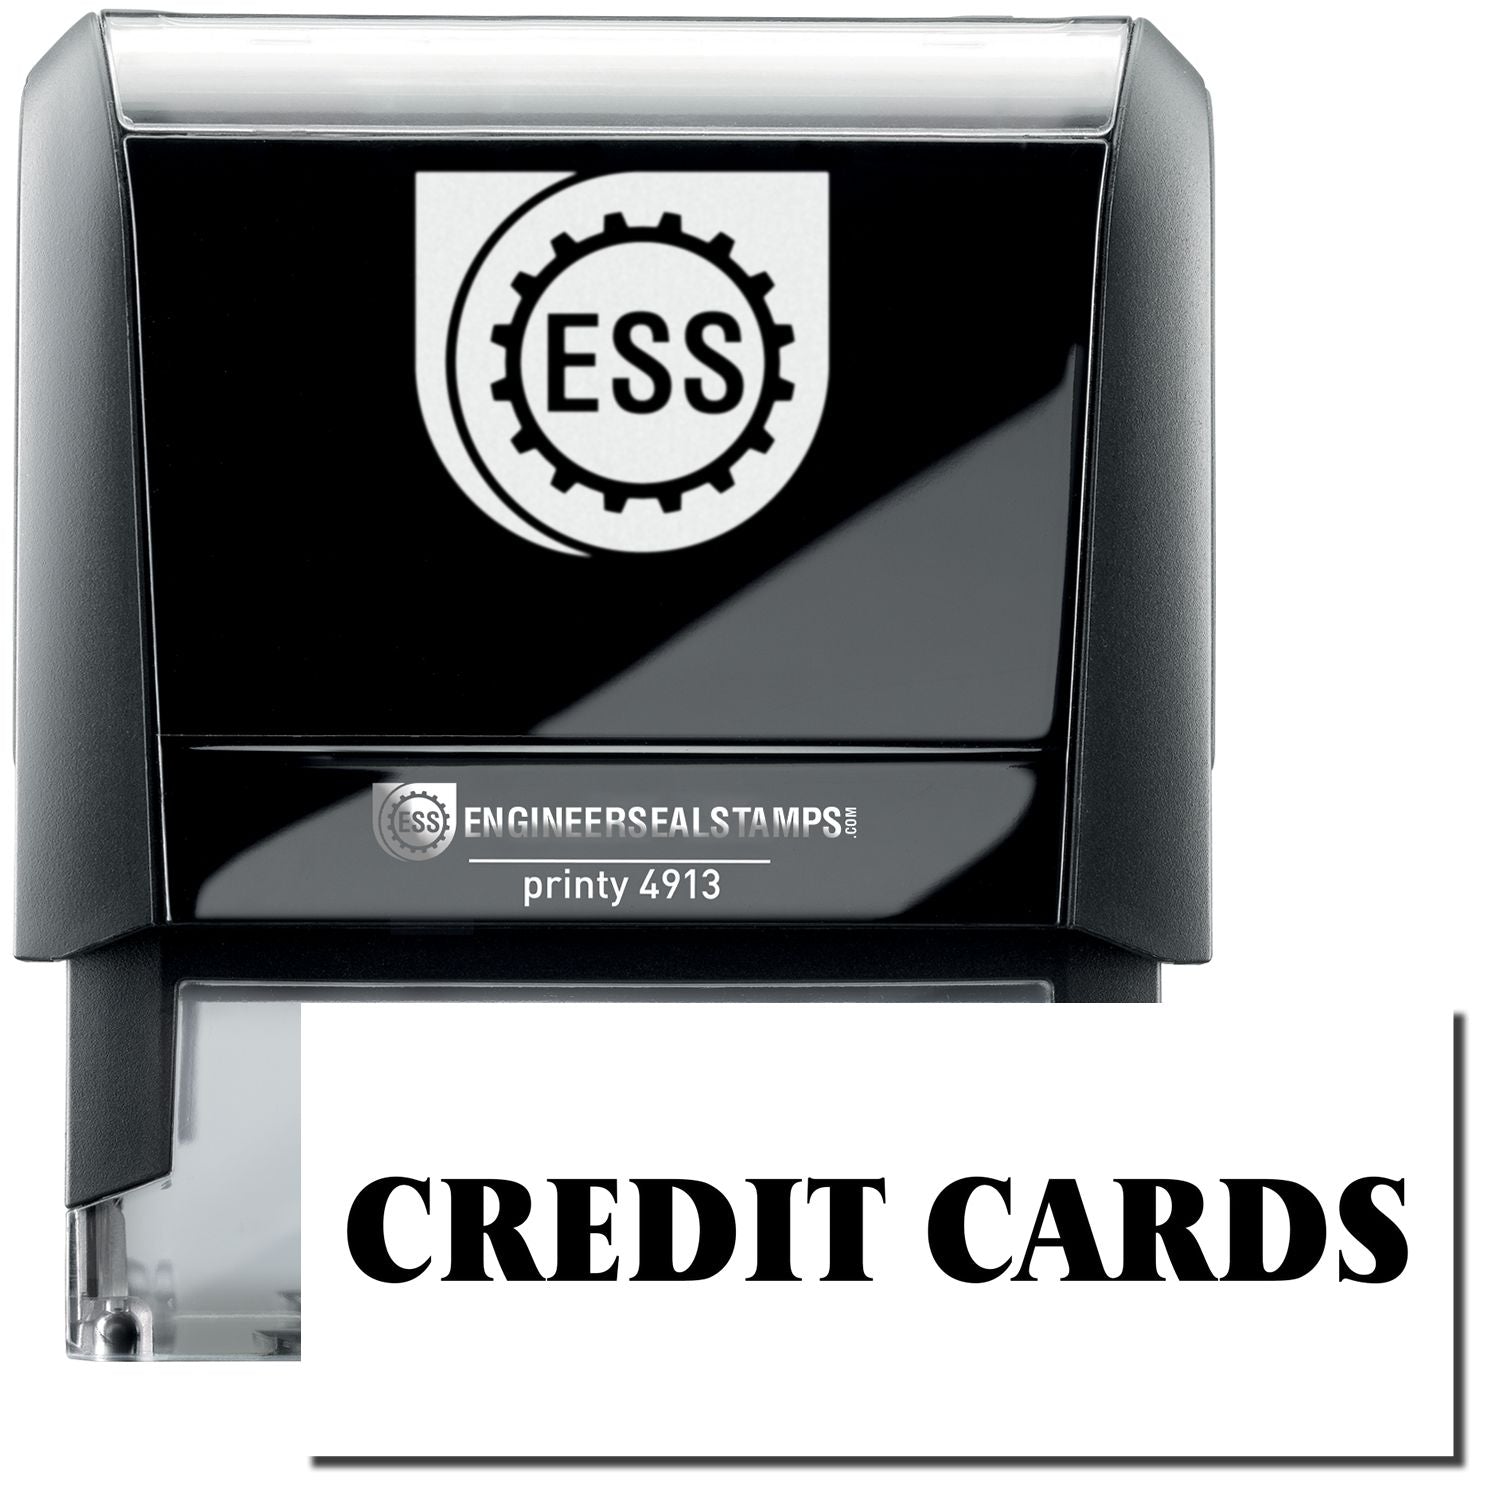 A self-inking stamp with a stamped image showing how the text "CREDIT CARDS" in a large bold font is displayed by it.